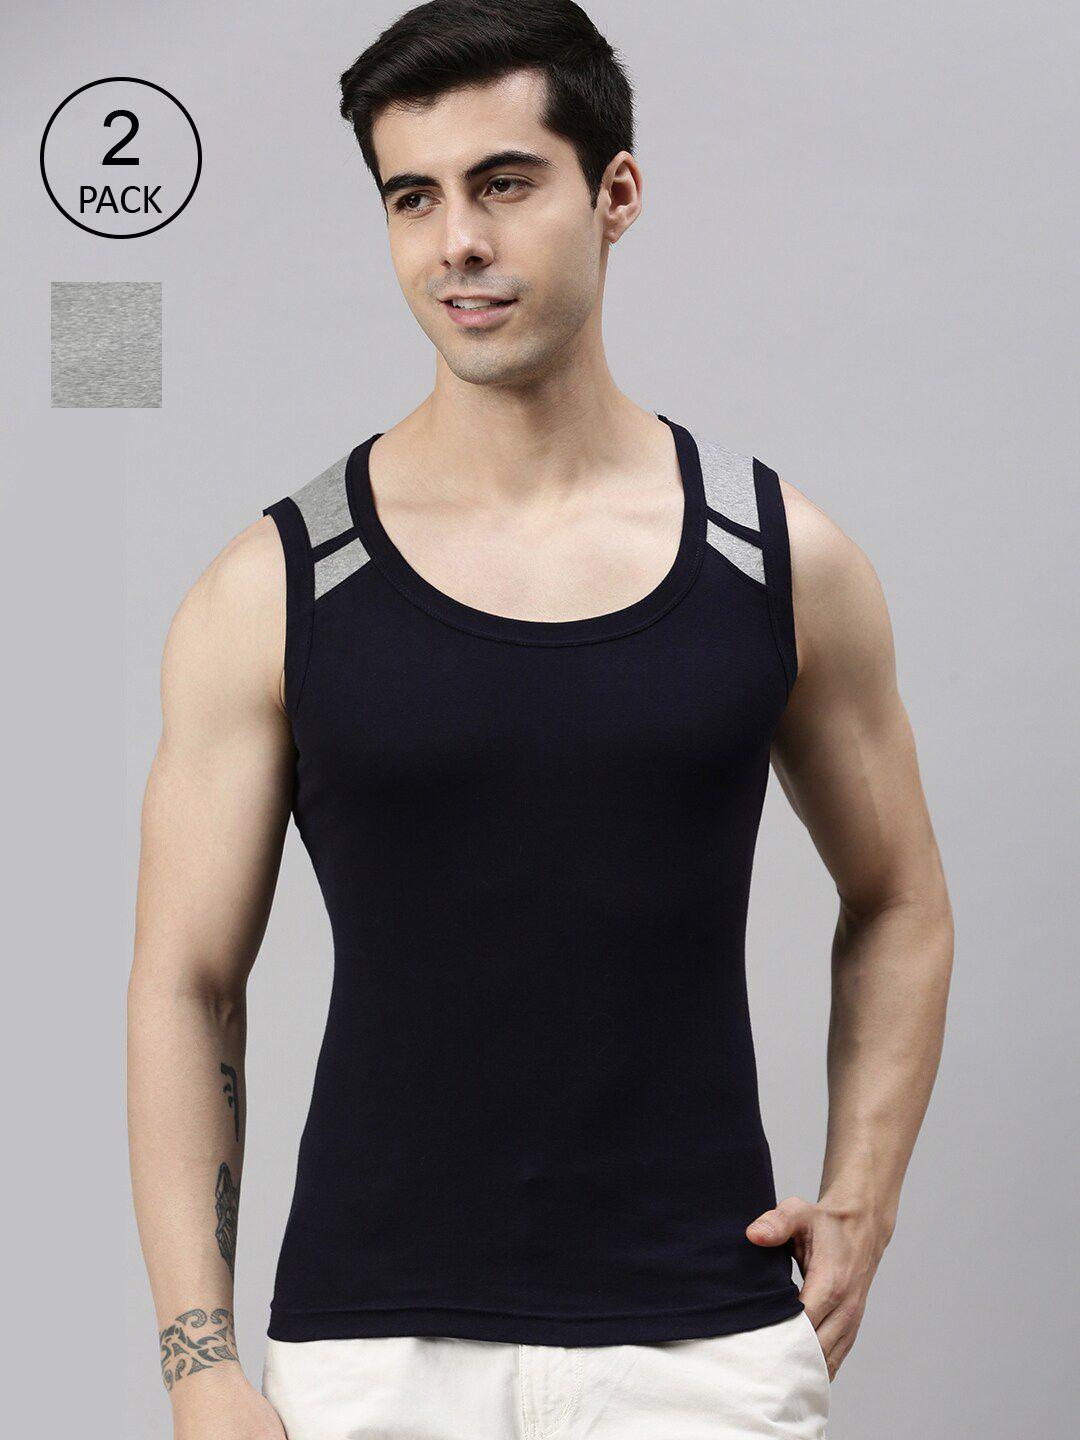 lux cozi men pack of 2 grey and black organic cotton innerwear vests